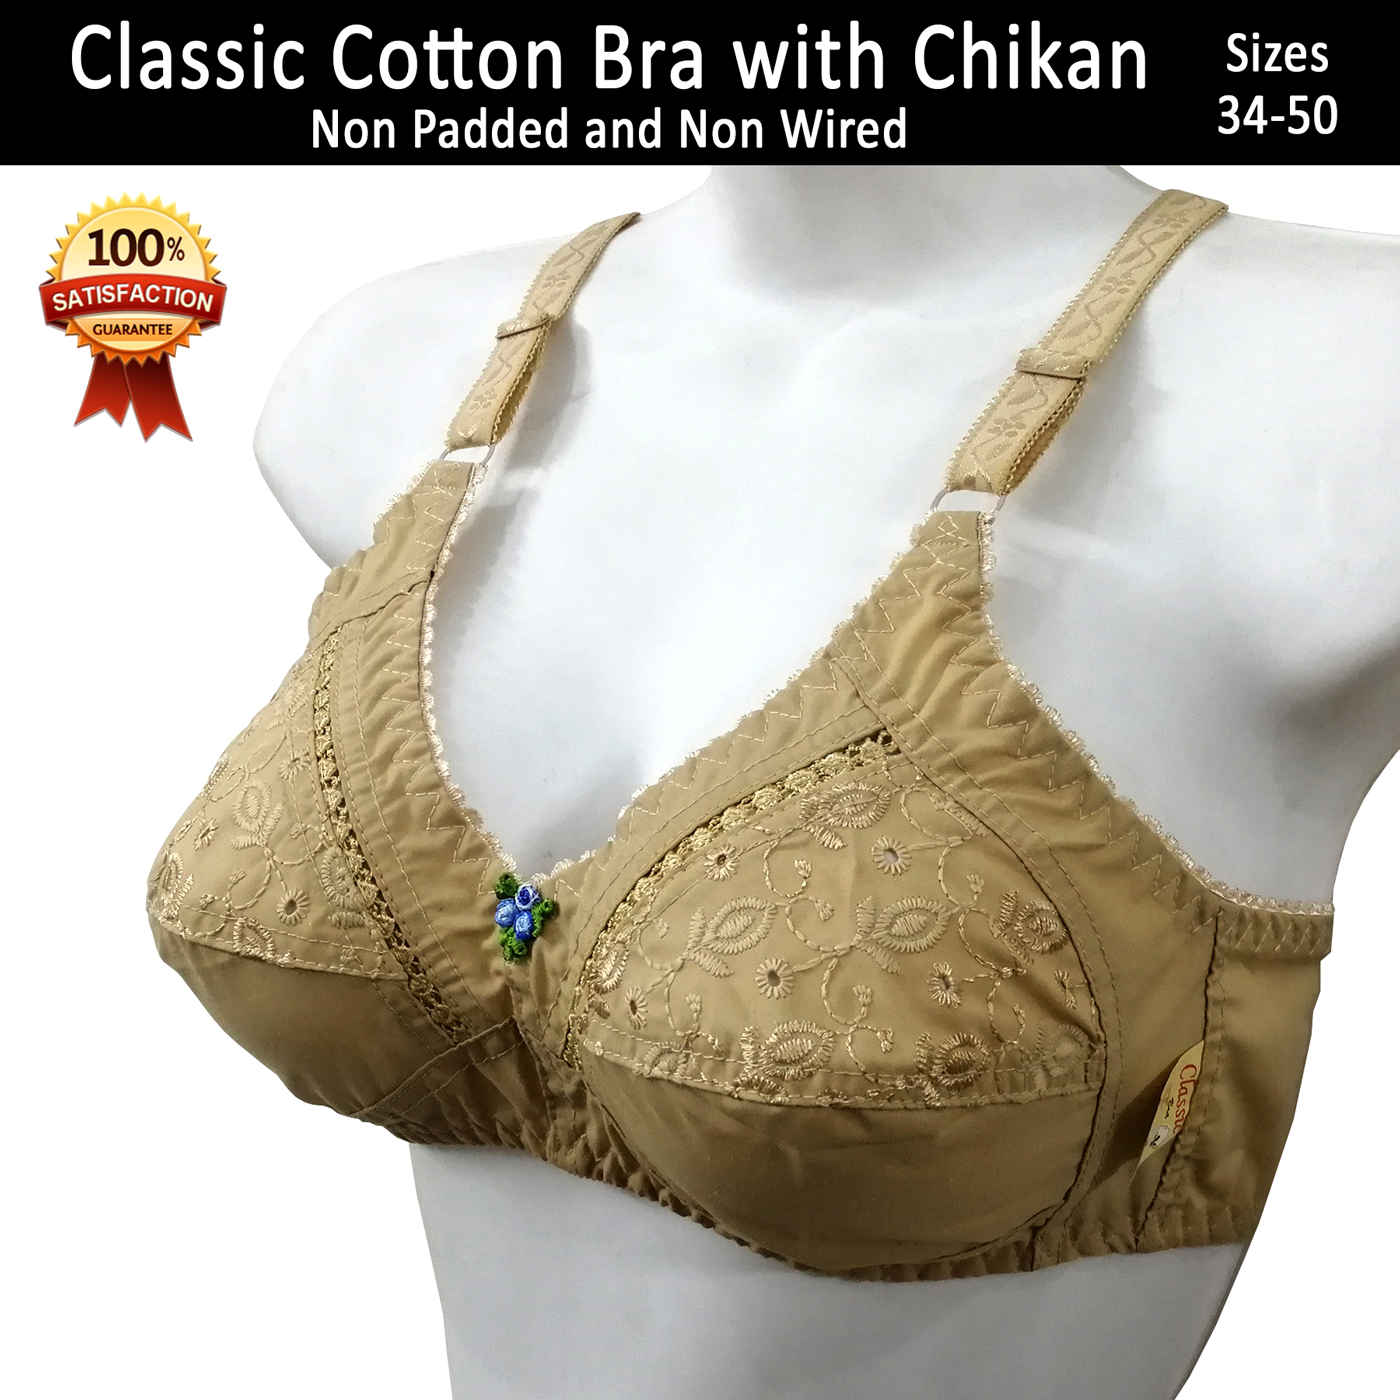 Good Quality Classic Cotton Bras for Women Non Padded Bra for Girls Non  wired Brassiere with Chikan in Beige 34 to 50 Sizes Bra Available Best Fits